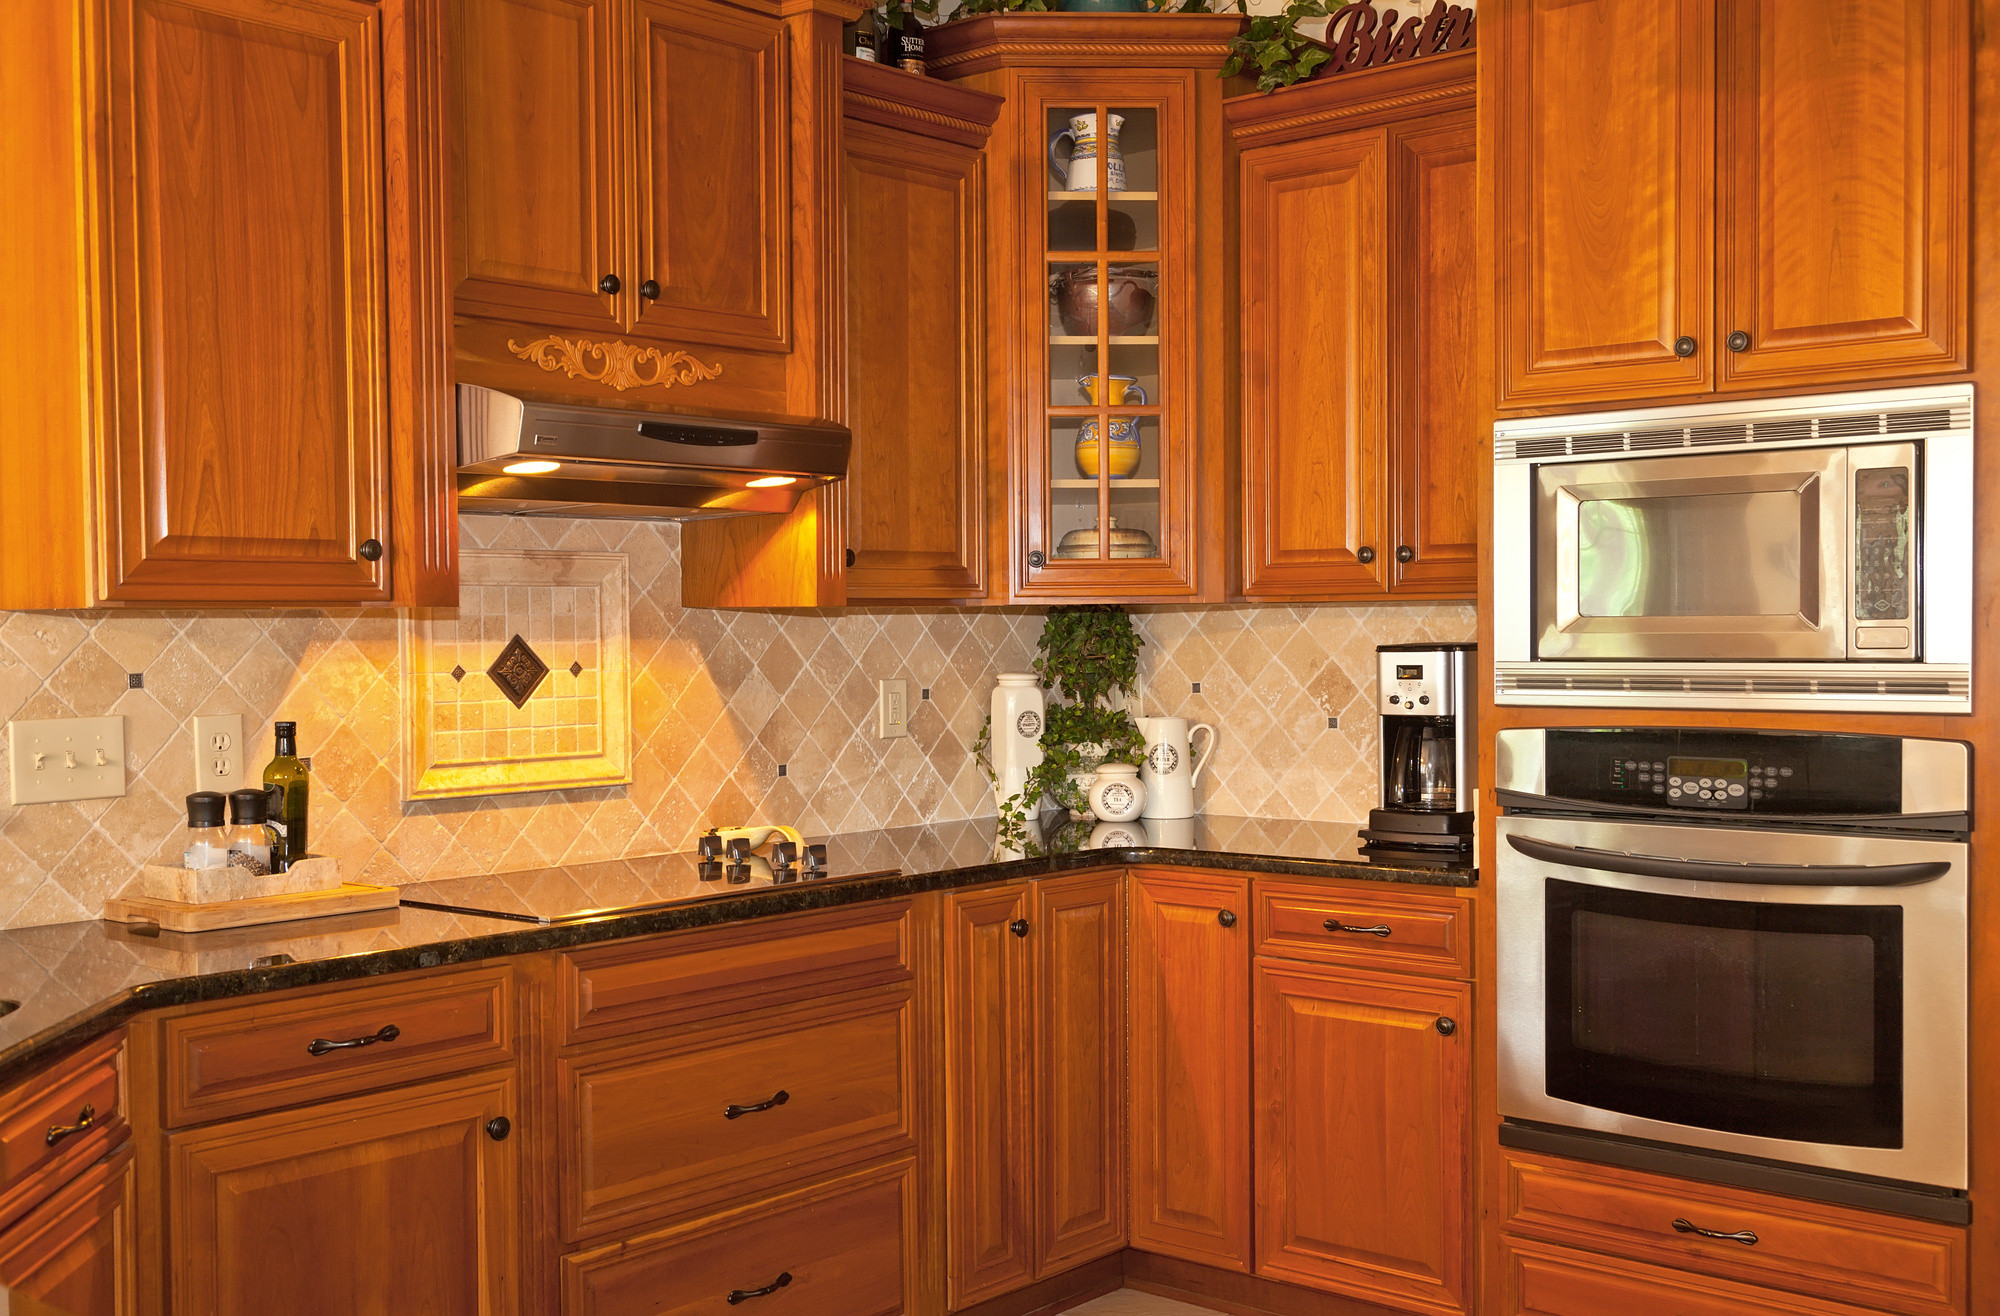 Standard Kitchen Counter Width
 Kitchen Cabinet Dimensions Your Guide to the Standard Sizes